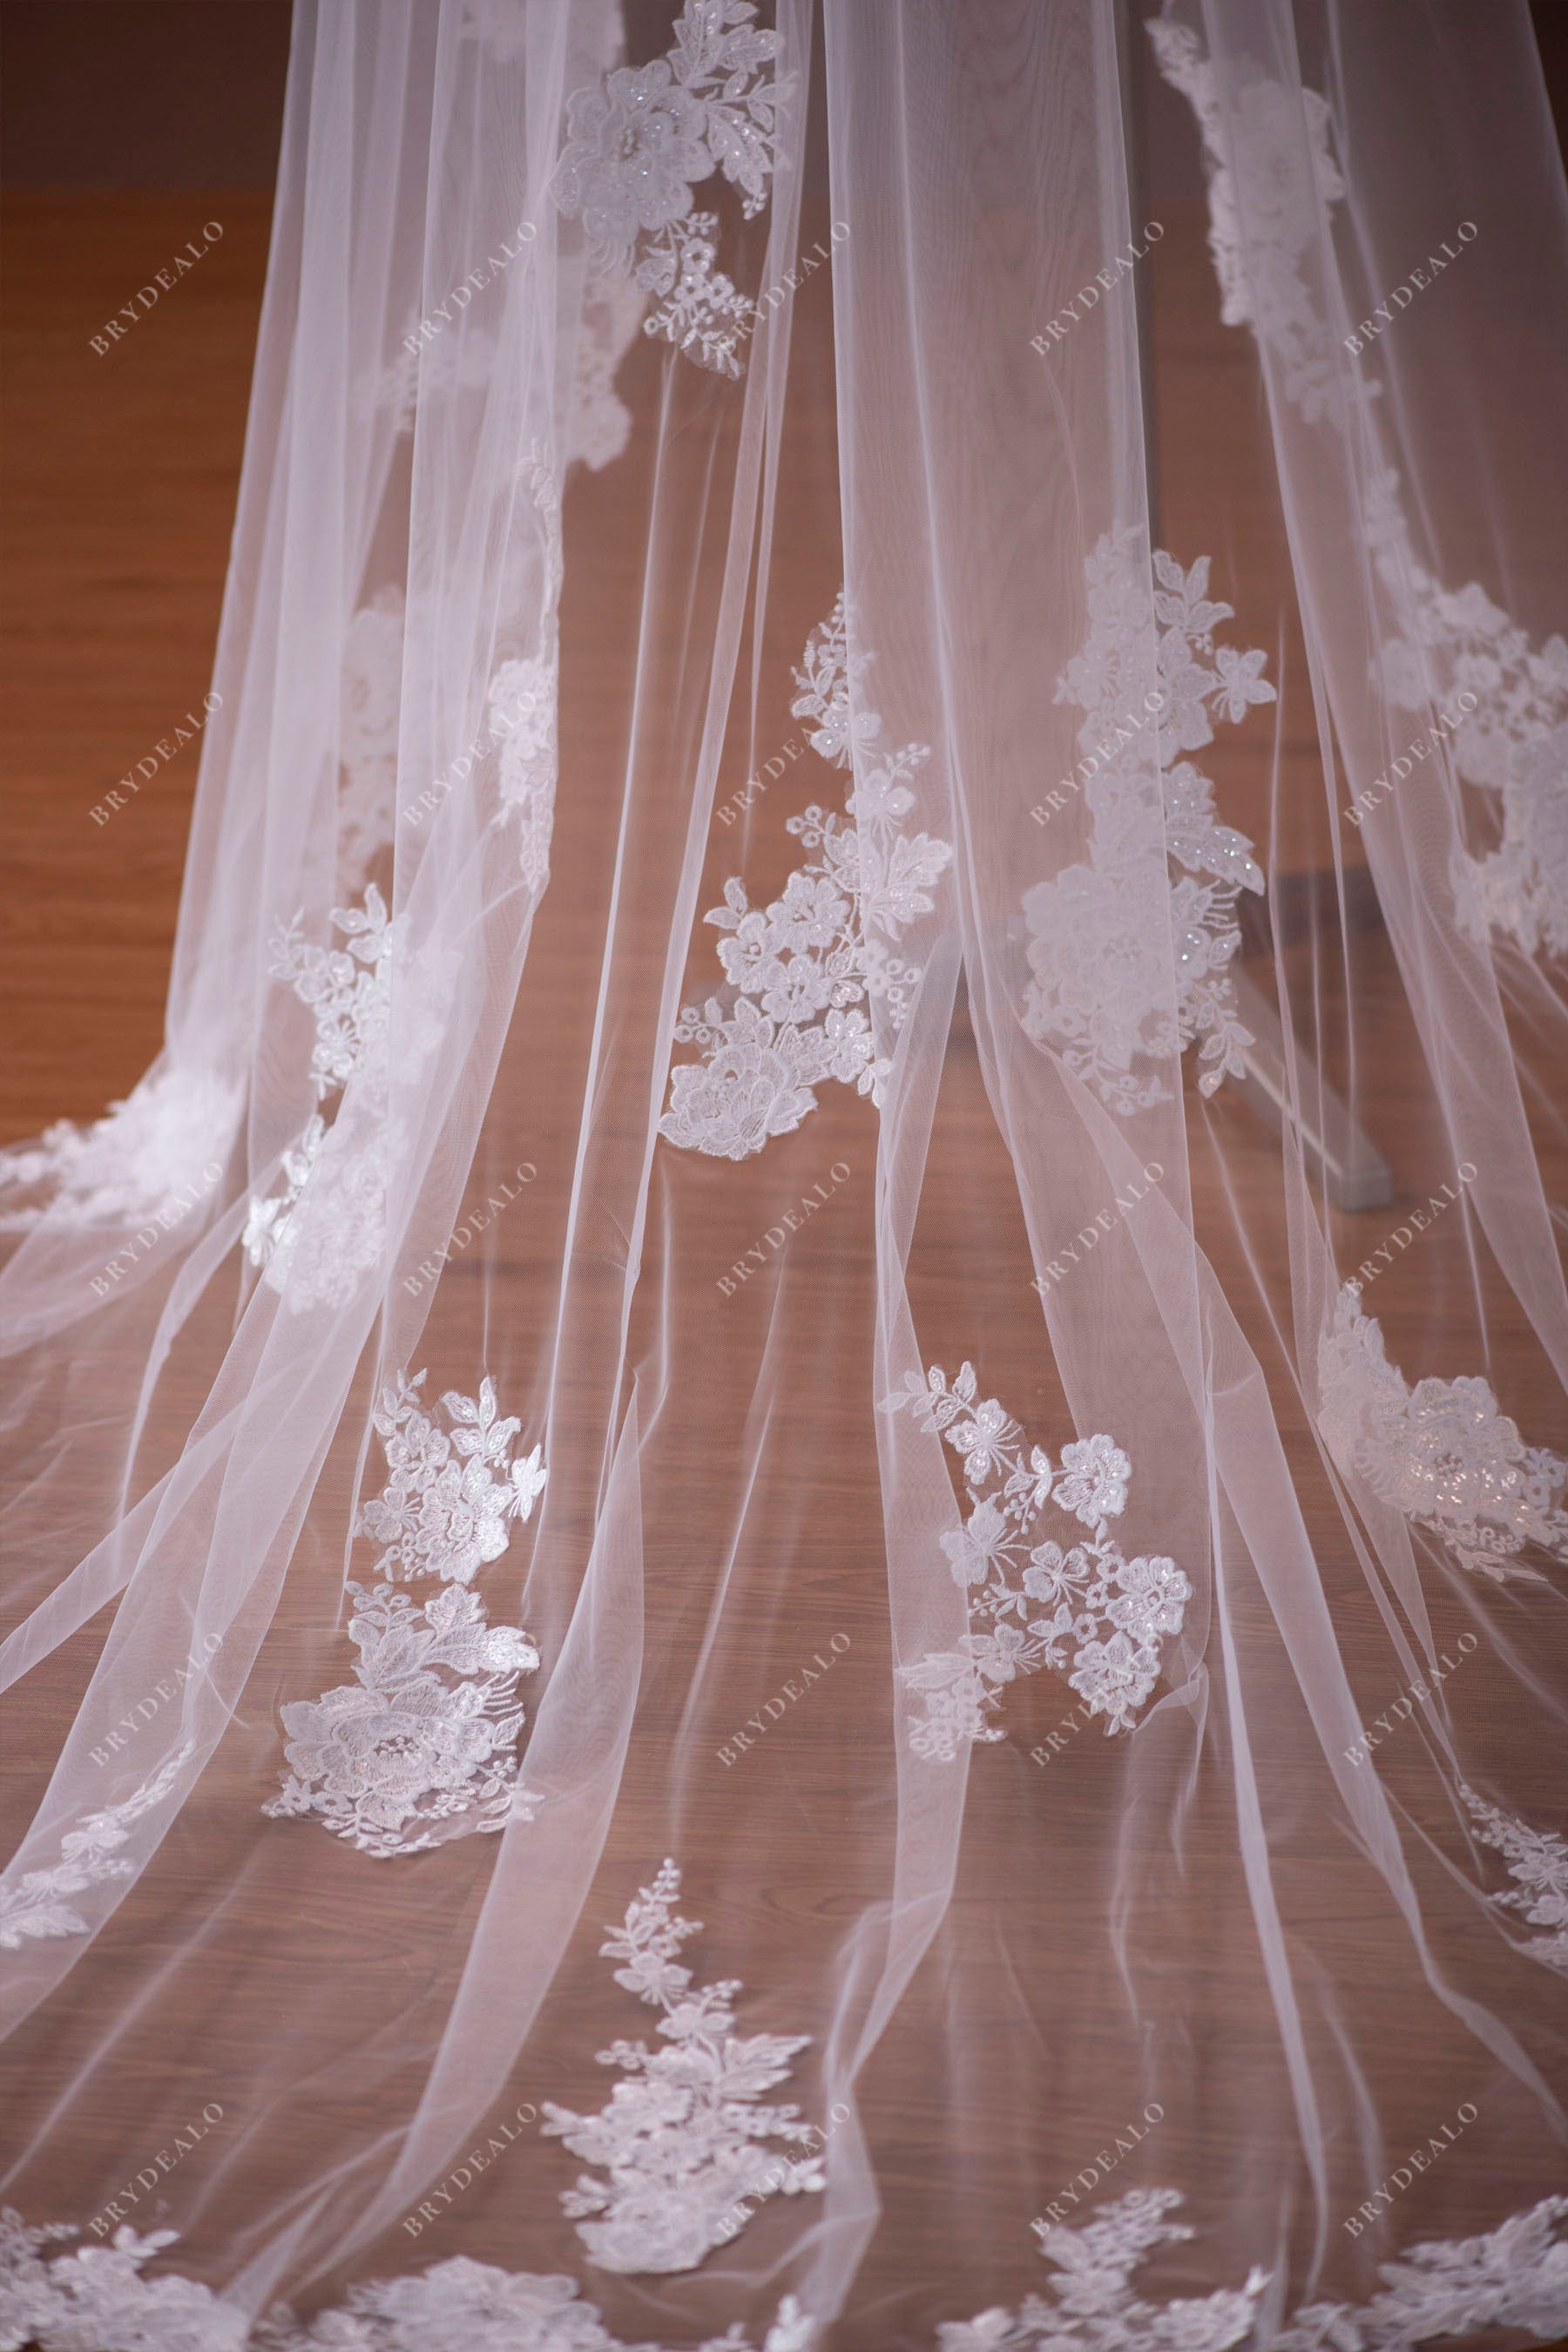 Two-Tier Chapel Length Shimmery Lace Bridal Veil For Sale